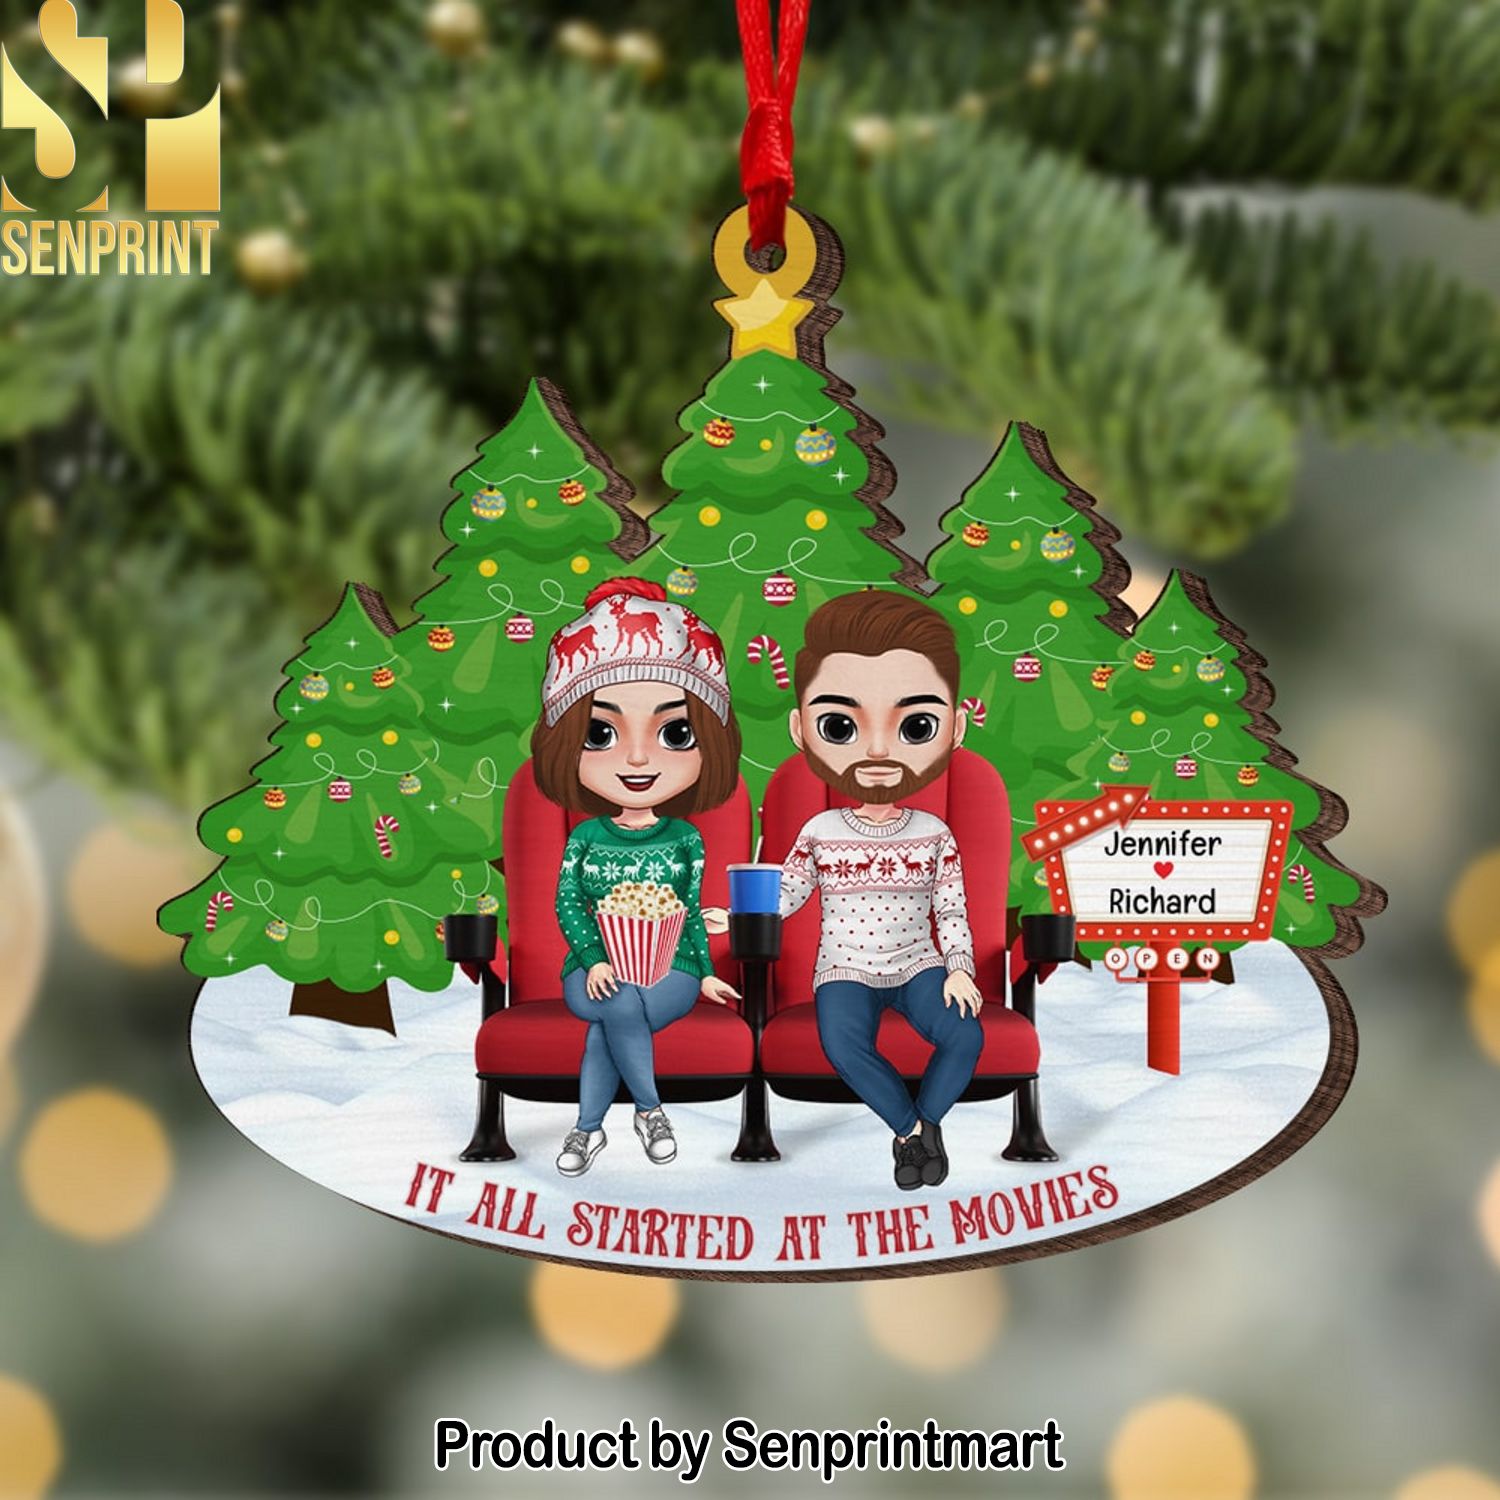 It All Started At The Movies Personalized Wood Ornament Gift For Him Gift For Her Christmas Gift Movie Couple Ornament